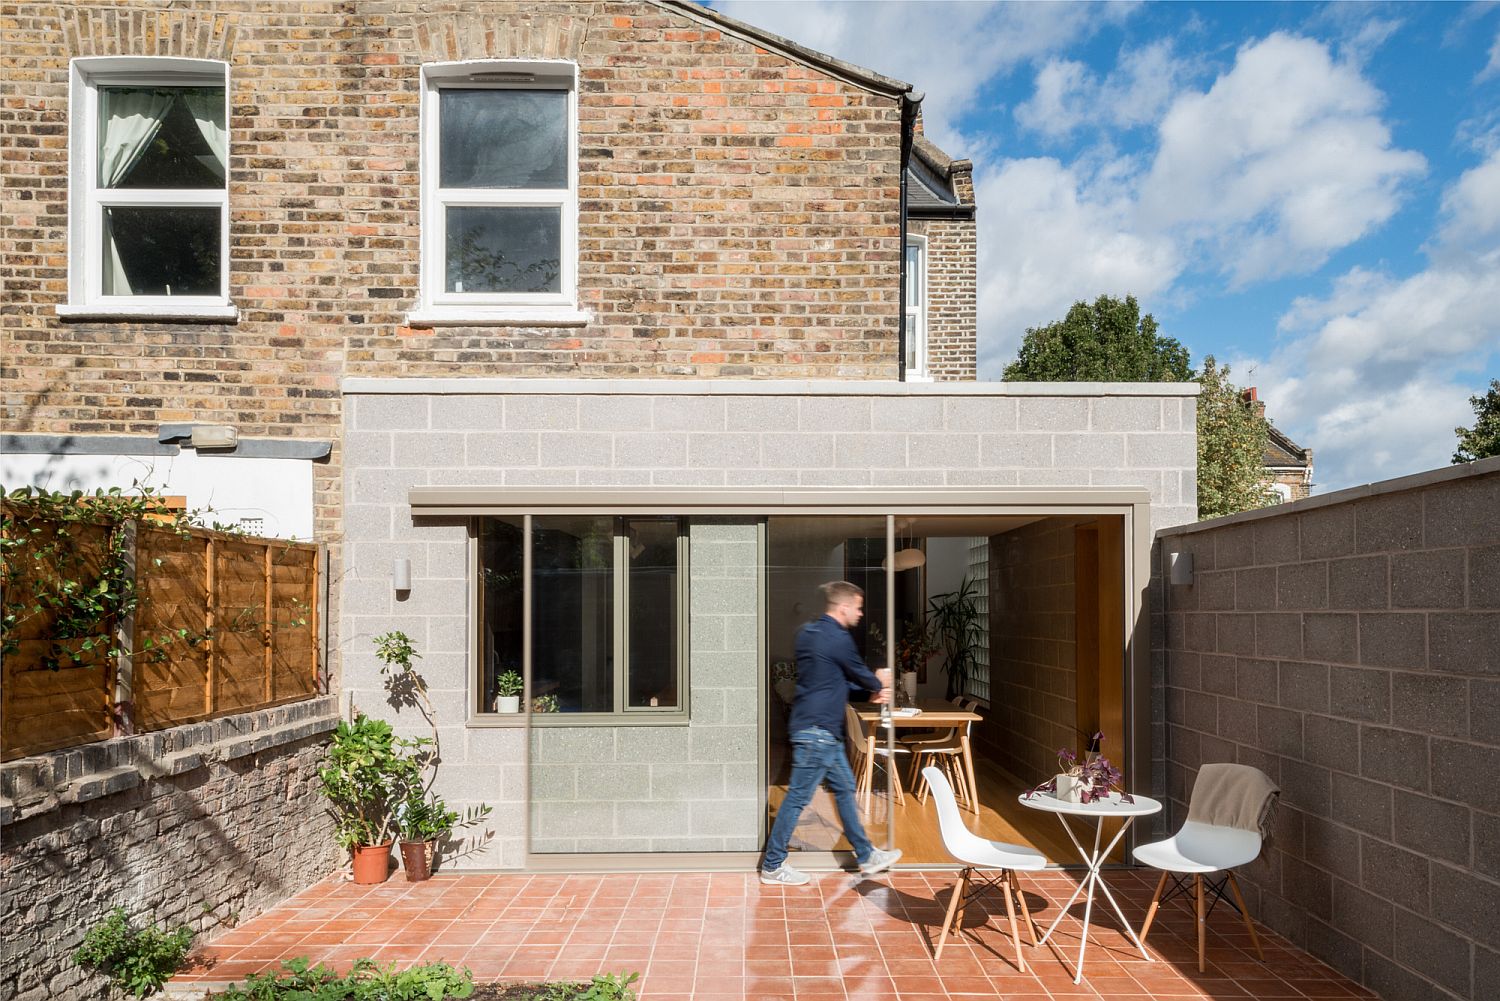 Old-brick-structure-of-the-house-combined-with-a-textural-modern-extension